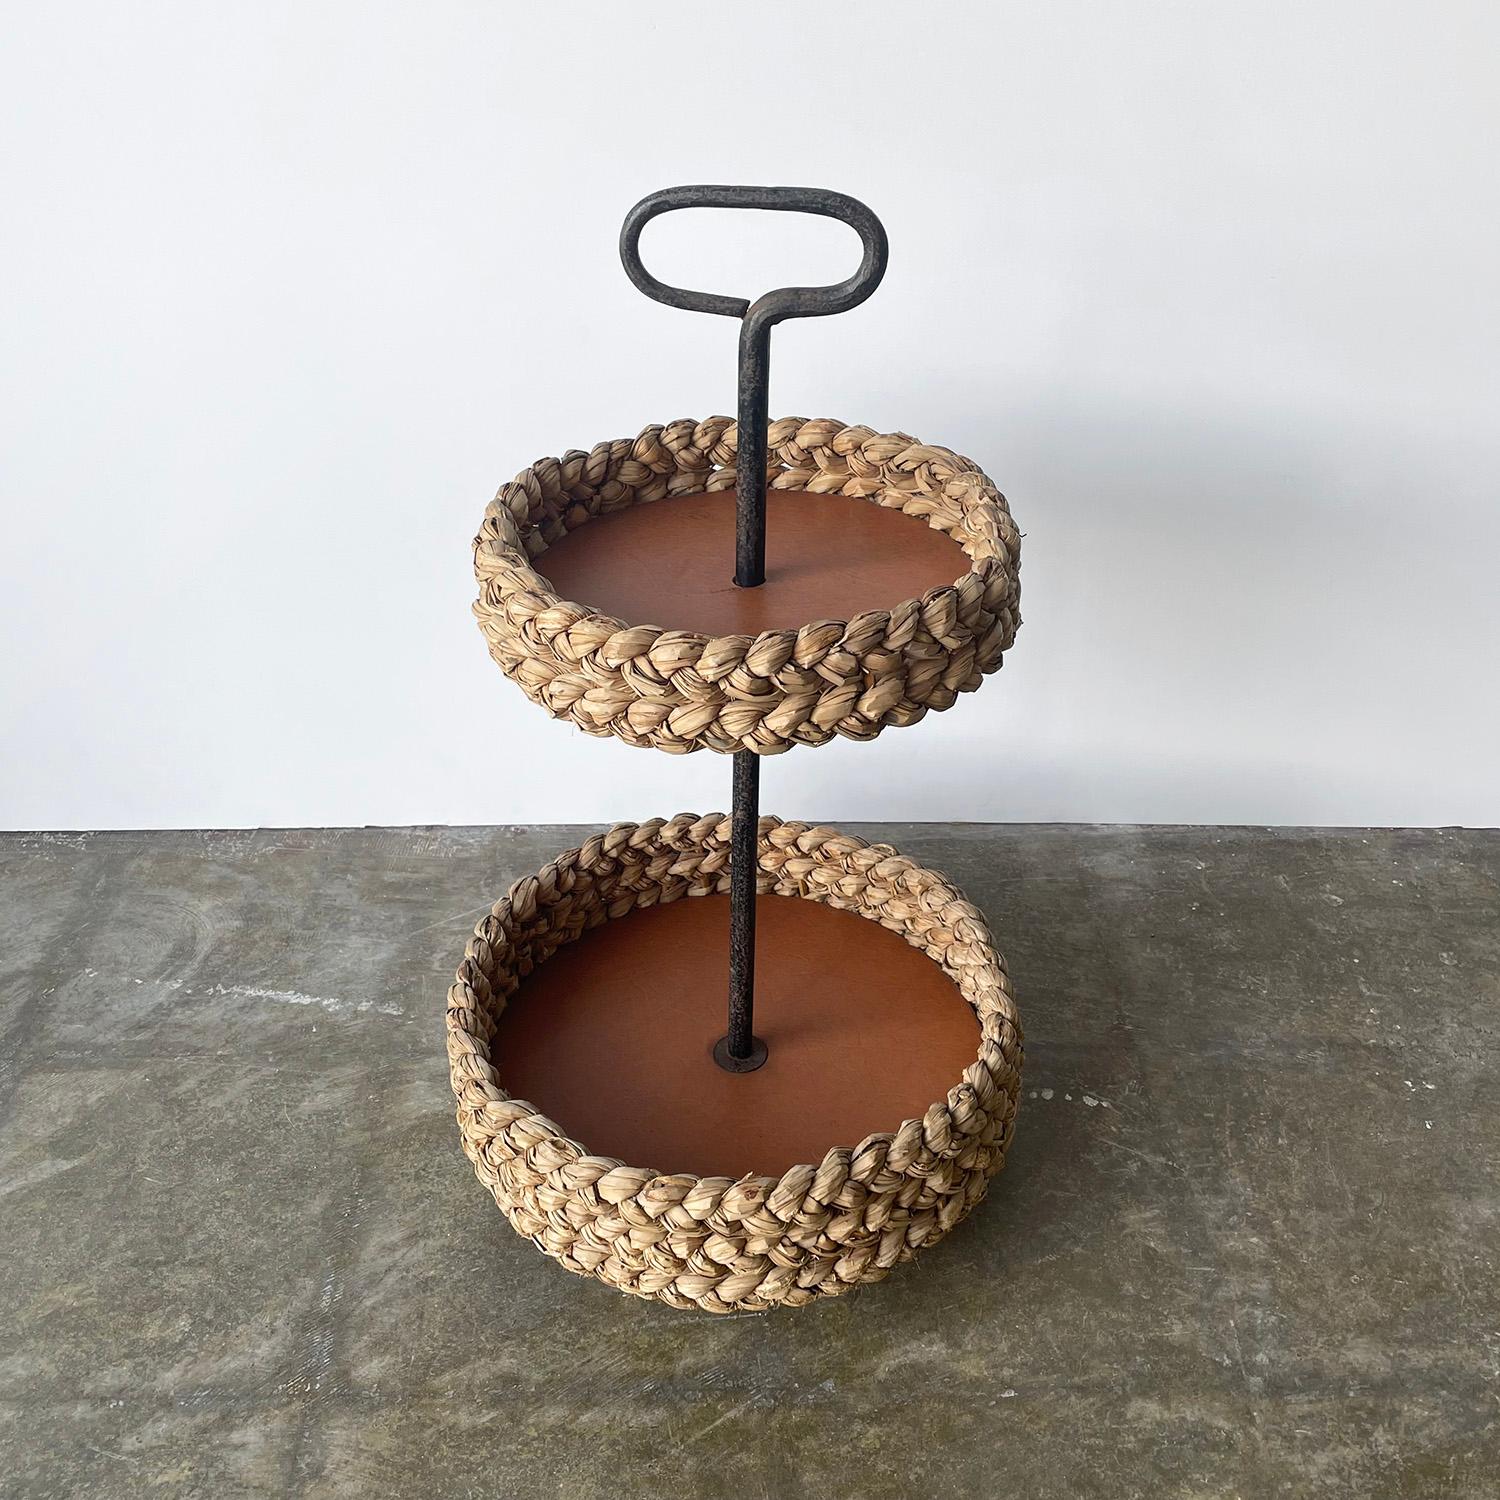 Adrien Audoux & Frida Minet cart
France, circa 1950’s
Multi use tiered storage or service cart on casters
Framed in oversized braided jute
Lined with original leatherette
Aged iron post and handle
Wonderful patina throughout

Overall: 28.75”